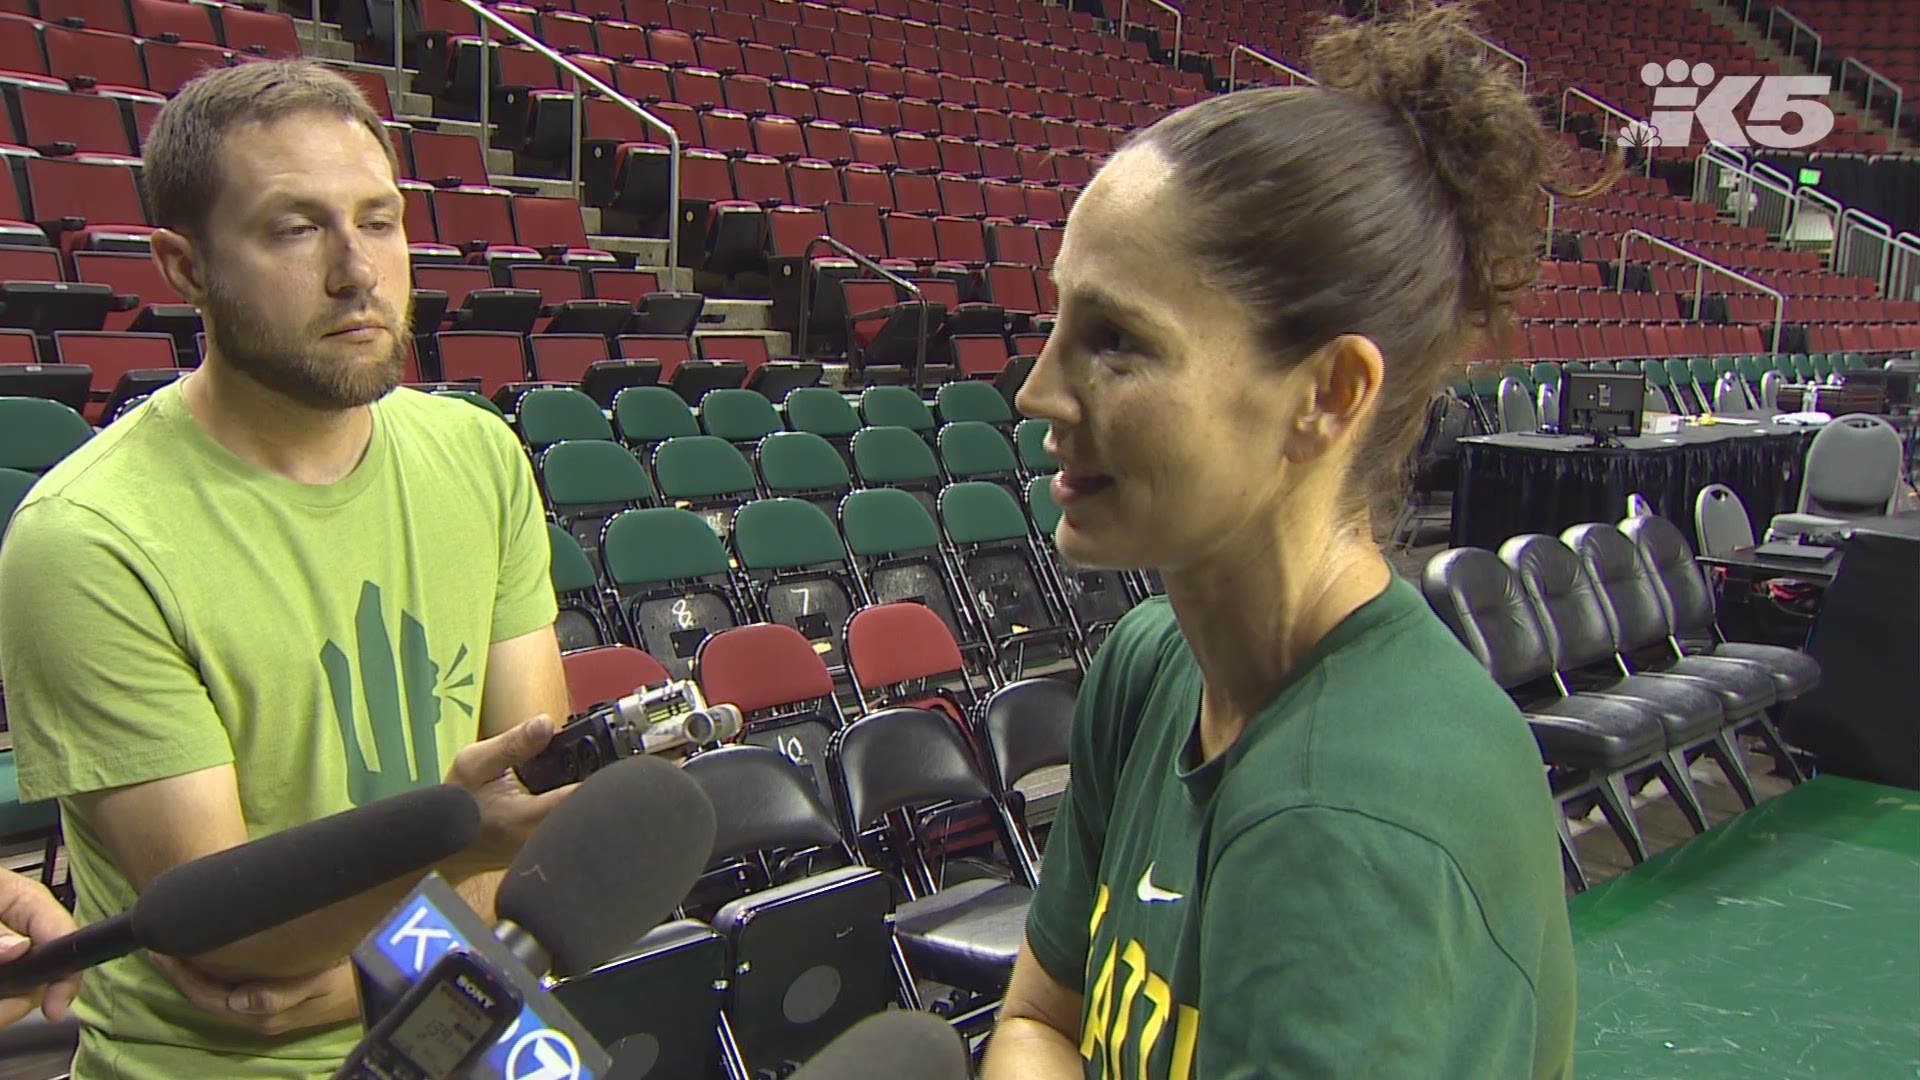 Seattle Storm guard Sue Bird is ready to play Game 5 of the WNBA semifinals after breaking her nose.